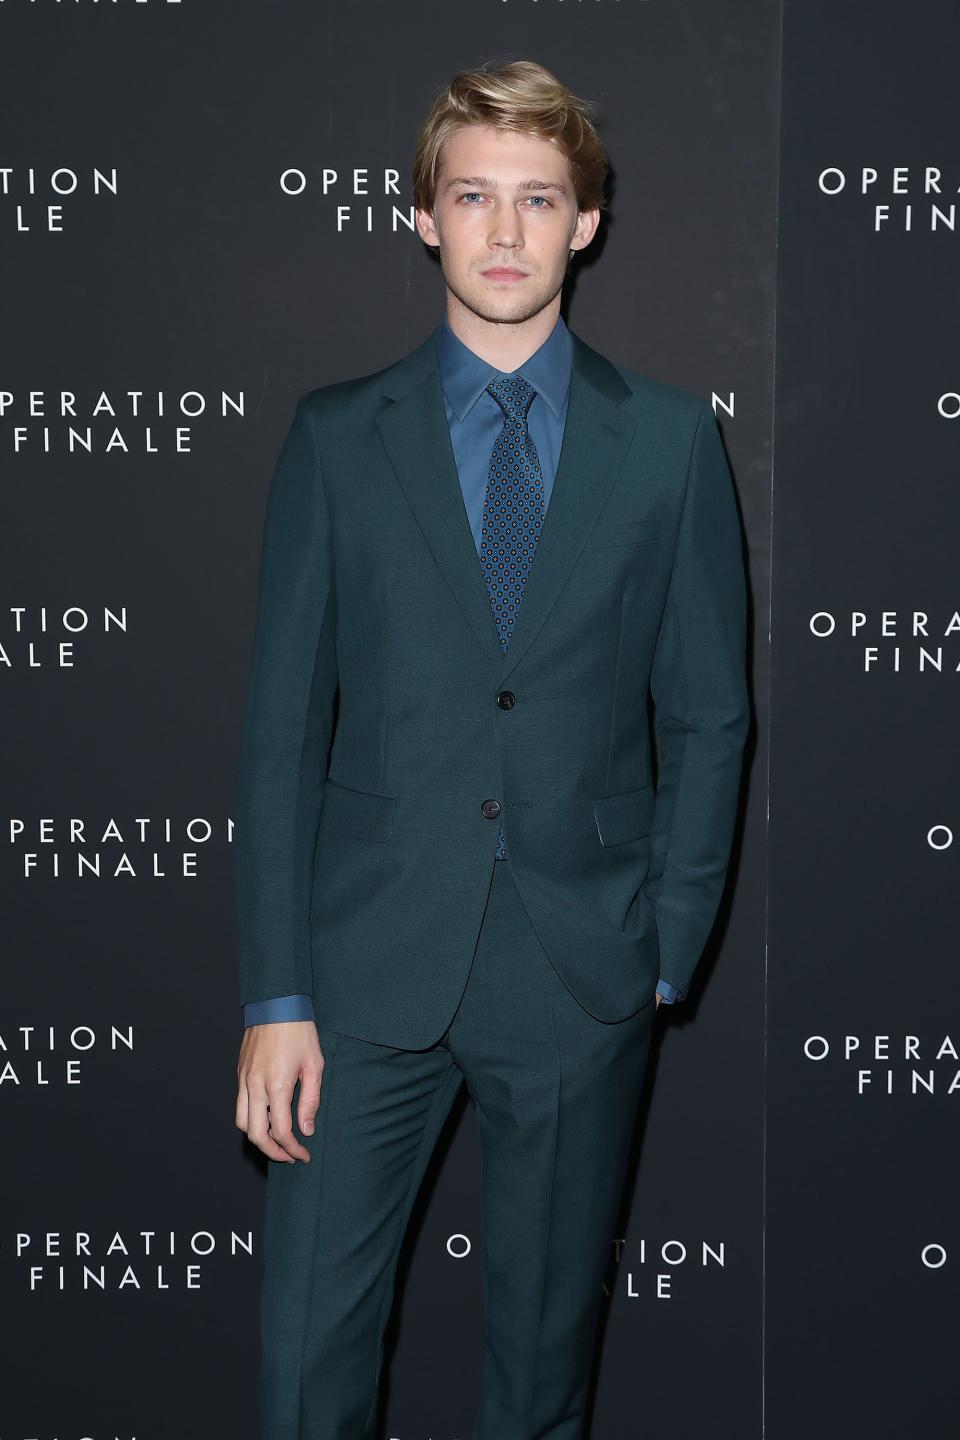 Last night, Operation Finale premiered at Walter Reade Theater at Lincoln Center.